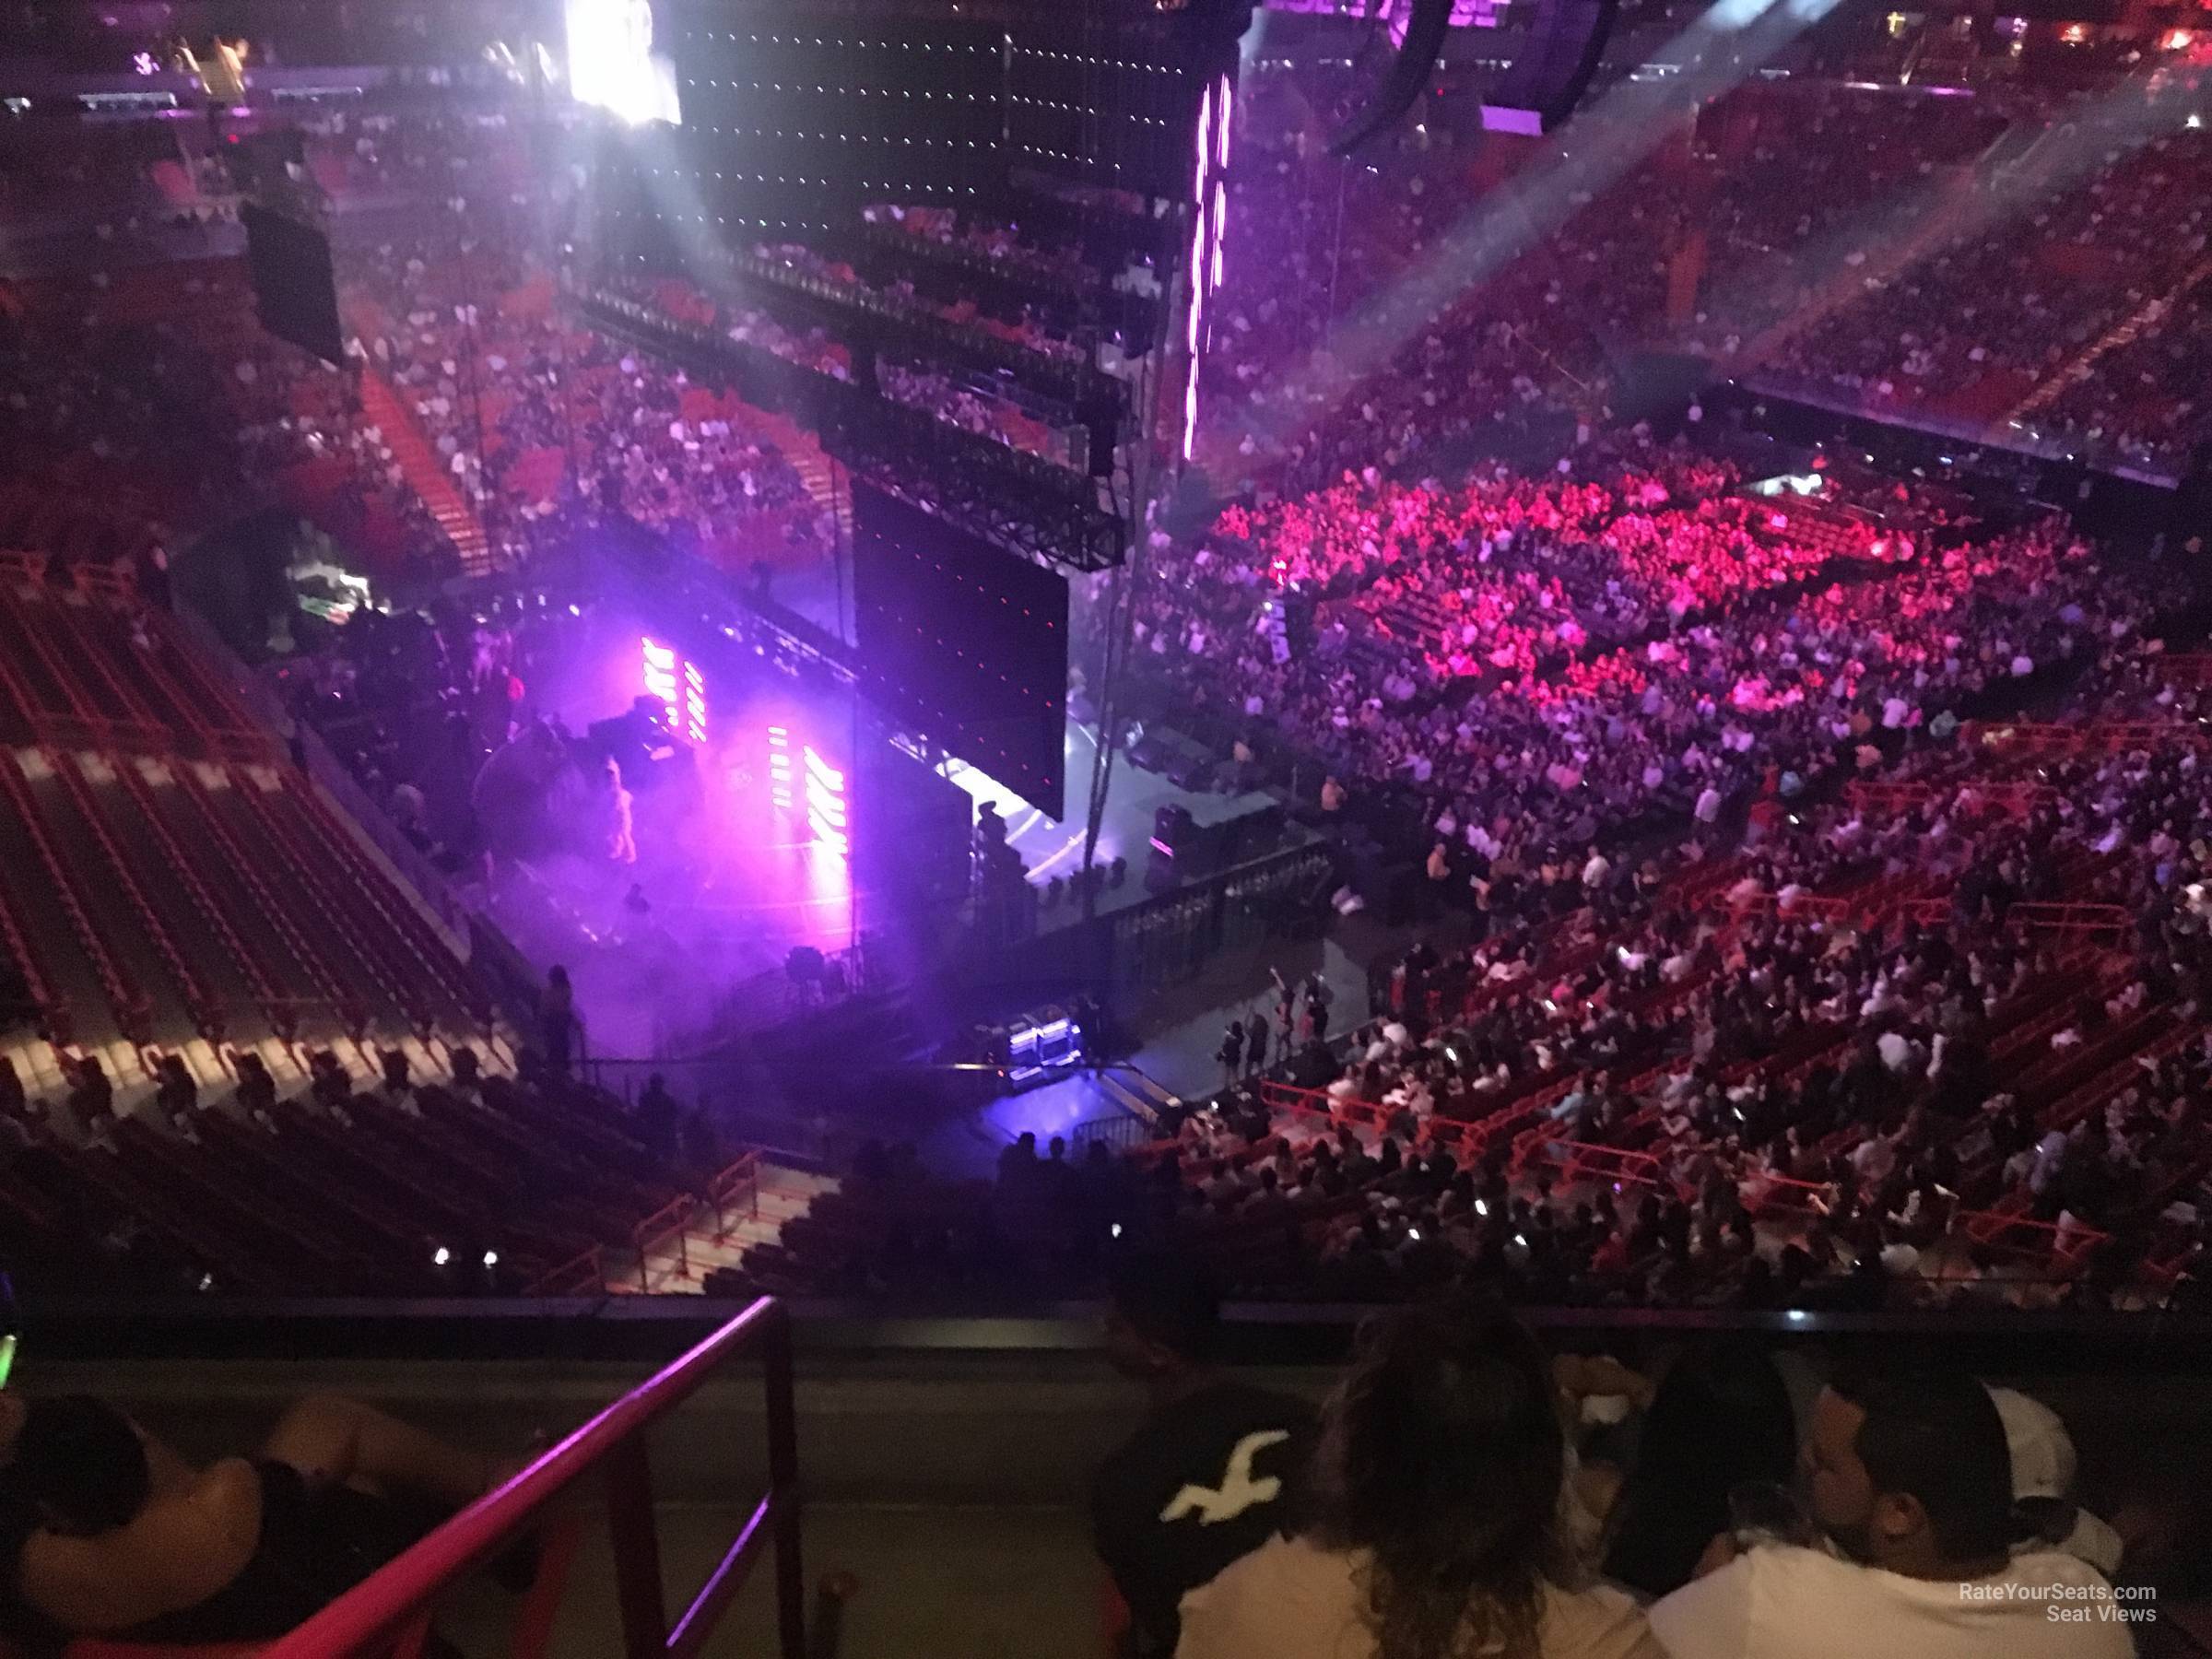 section 329, row 3 seat view  for concert - ftx arena